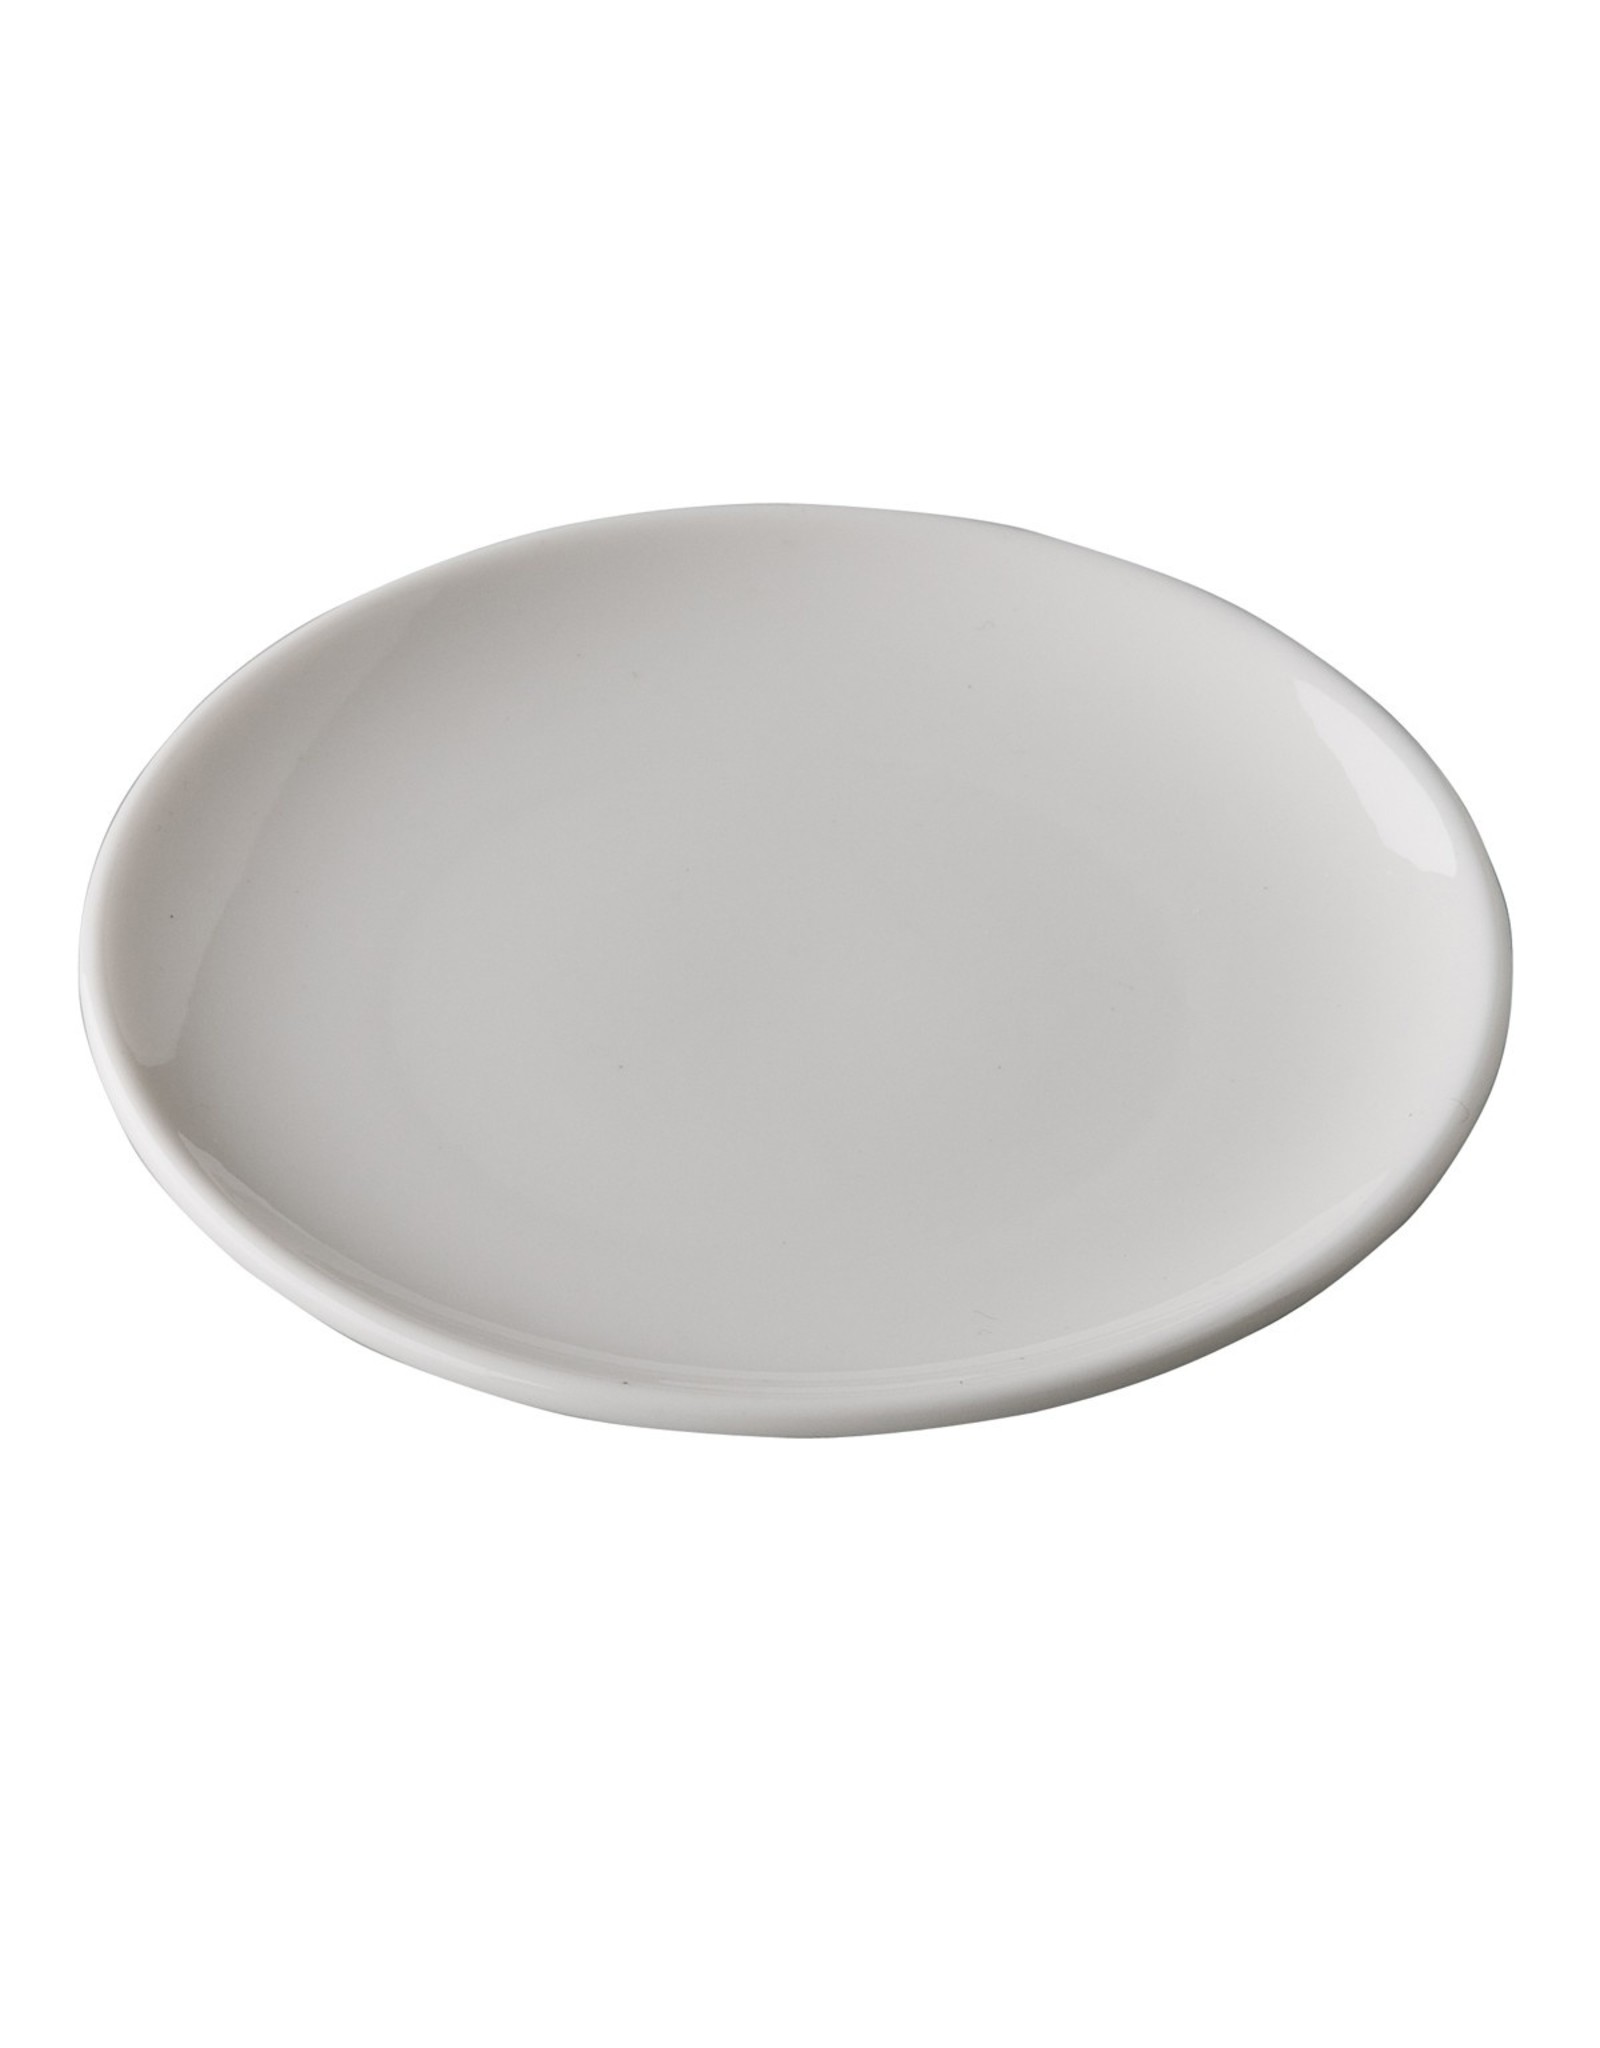 Stylepoint Q Fine China coupe plate 14 cm